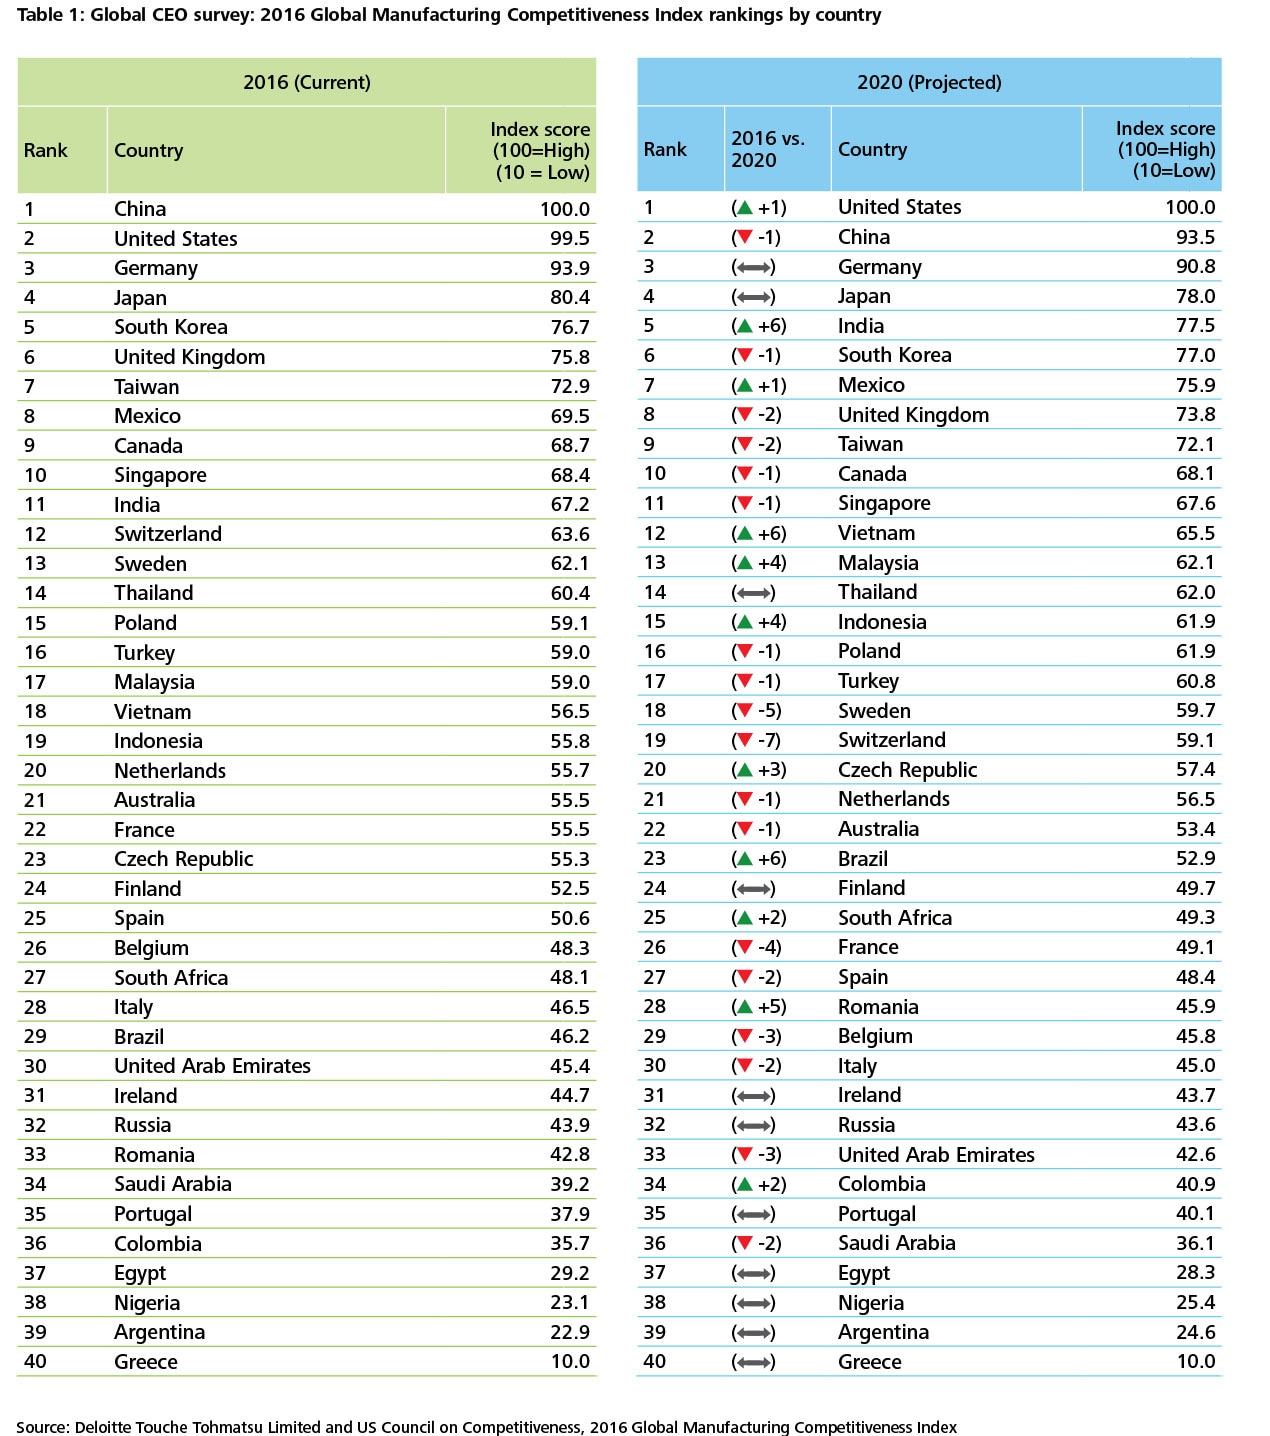 http://www2.deloitte.com/content/dam/Deloitte/global/Images/infographics/gx-us-global-manufacturing-table-ranking.jpg